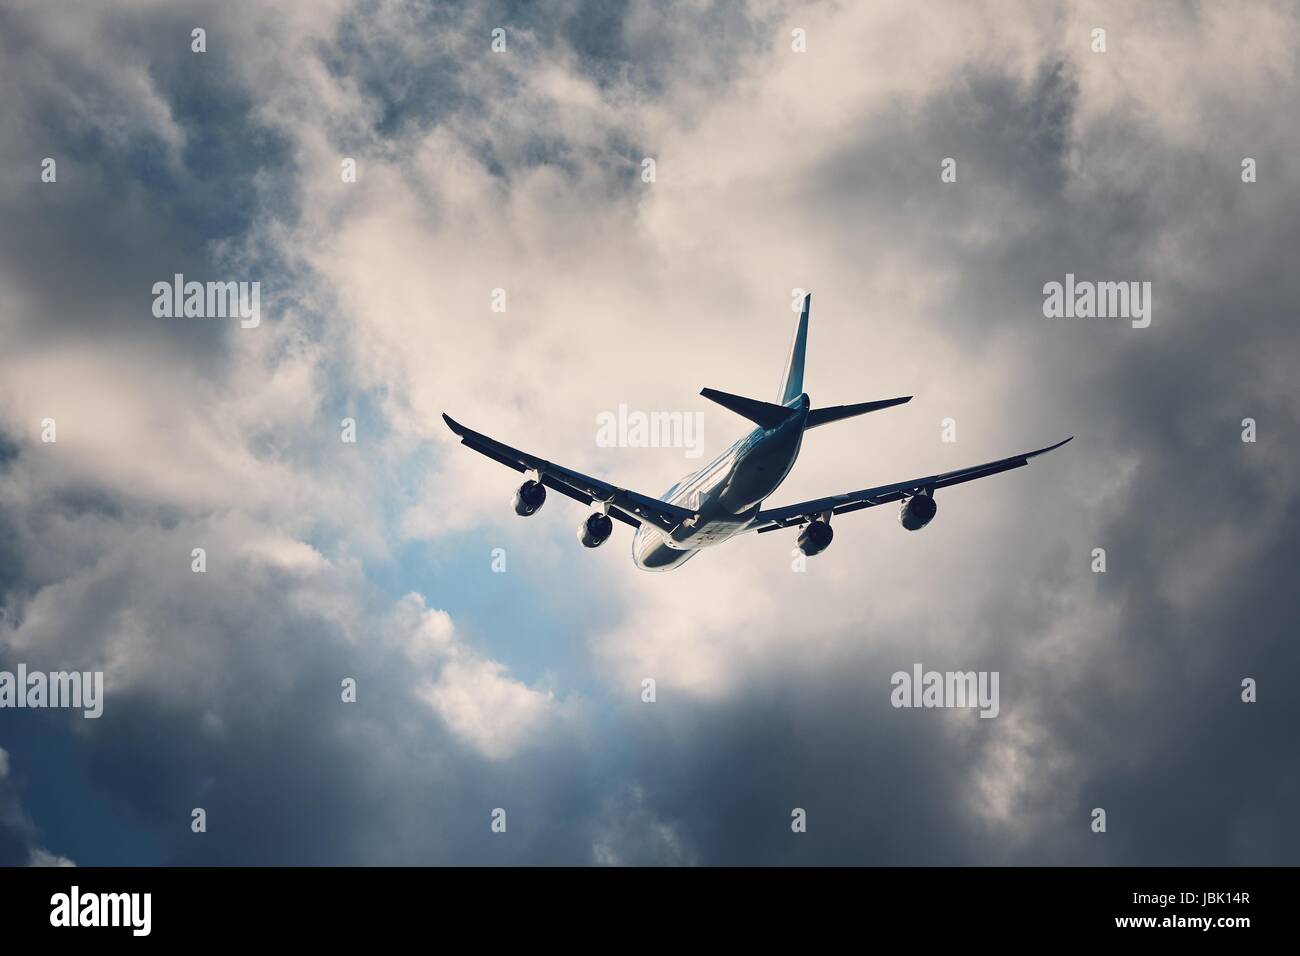 Flight in bad weather. Airplane flying under dramatic storm clouds. Stock Photo